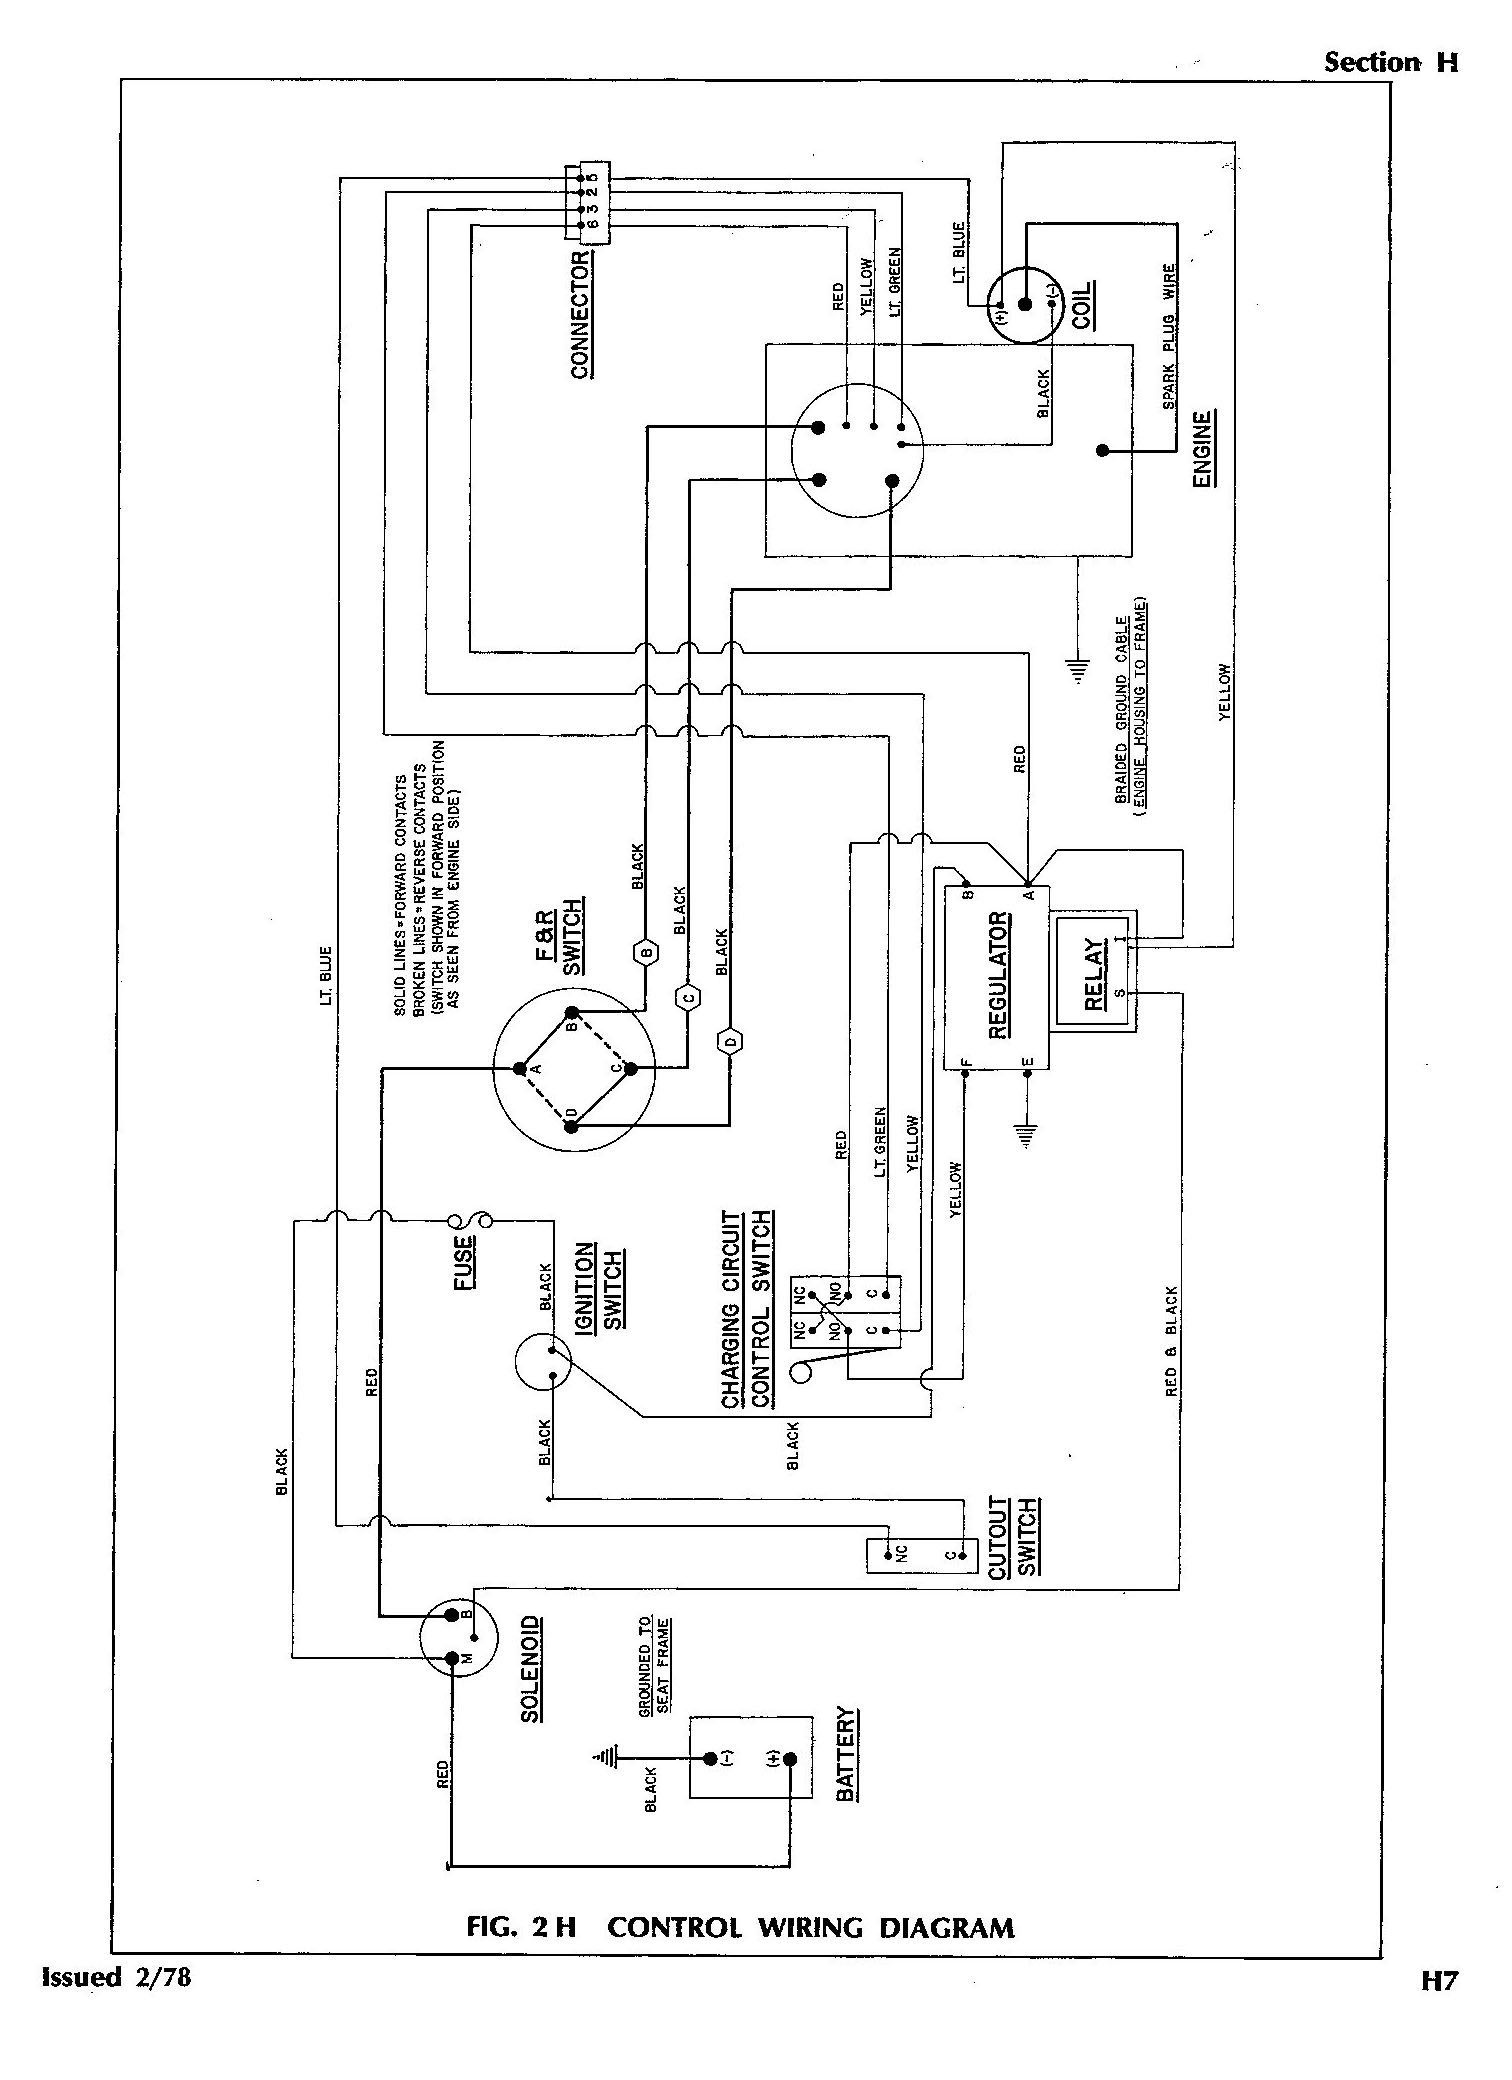 Workhorse 5 Ballast Wiring Diagram from paintingvalley.com